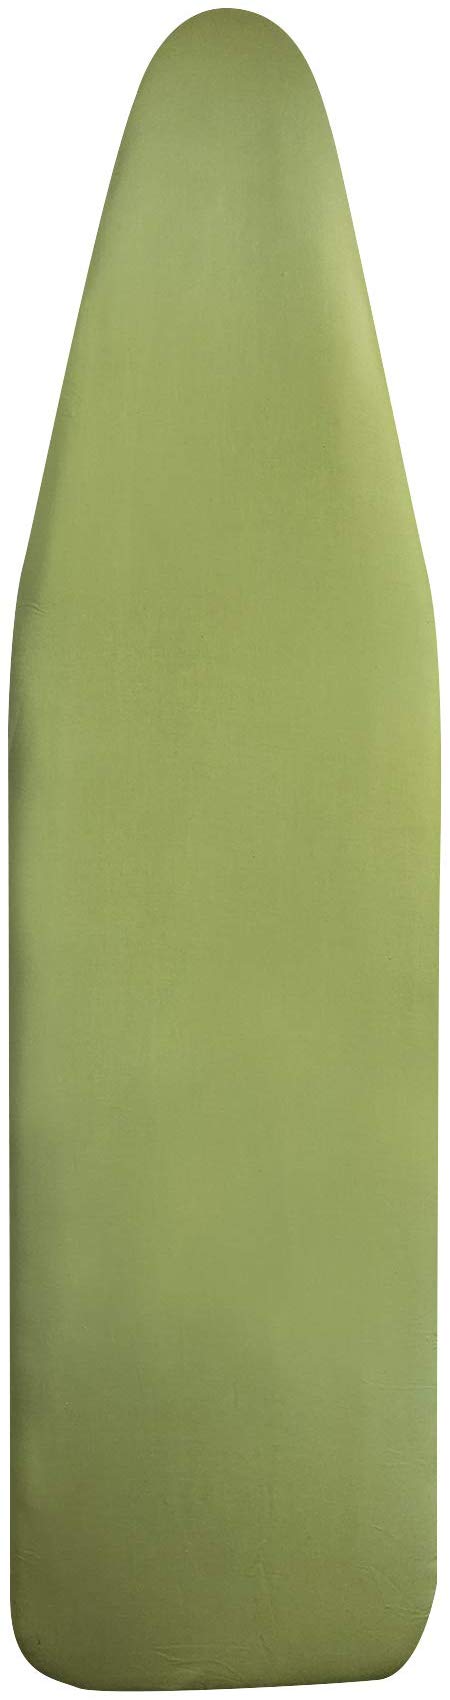 Homz 1905043 Ultimate Replacement Cover and Pad for Standard Width Ironing Board, 13-15" W x 53-55" L, Green